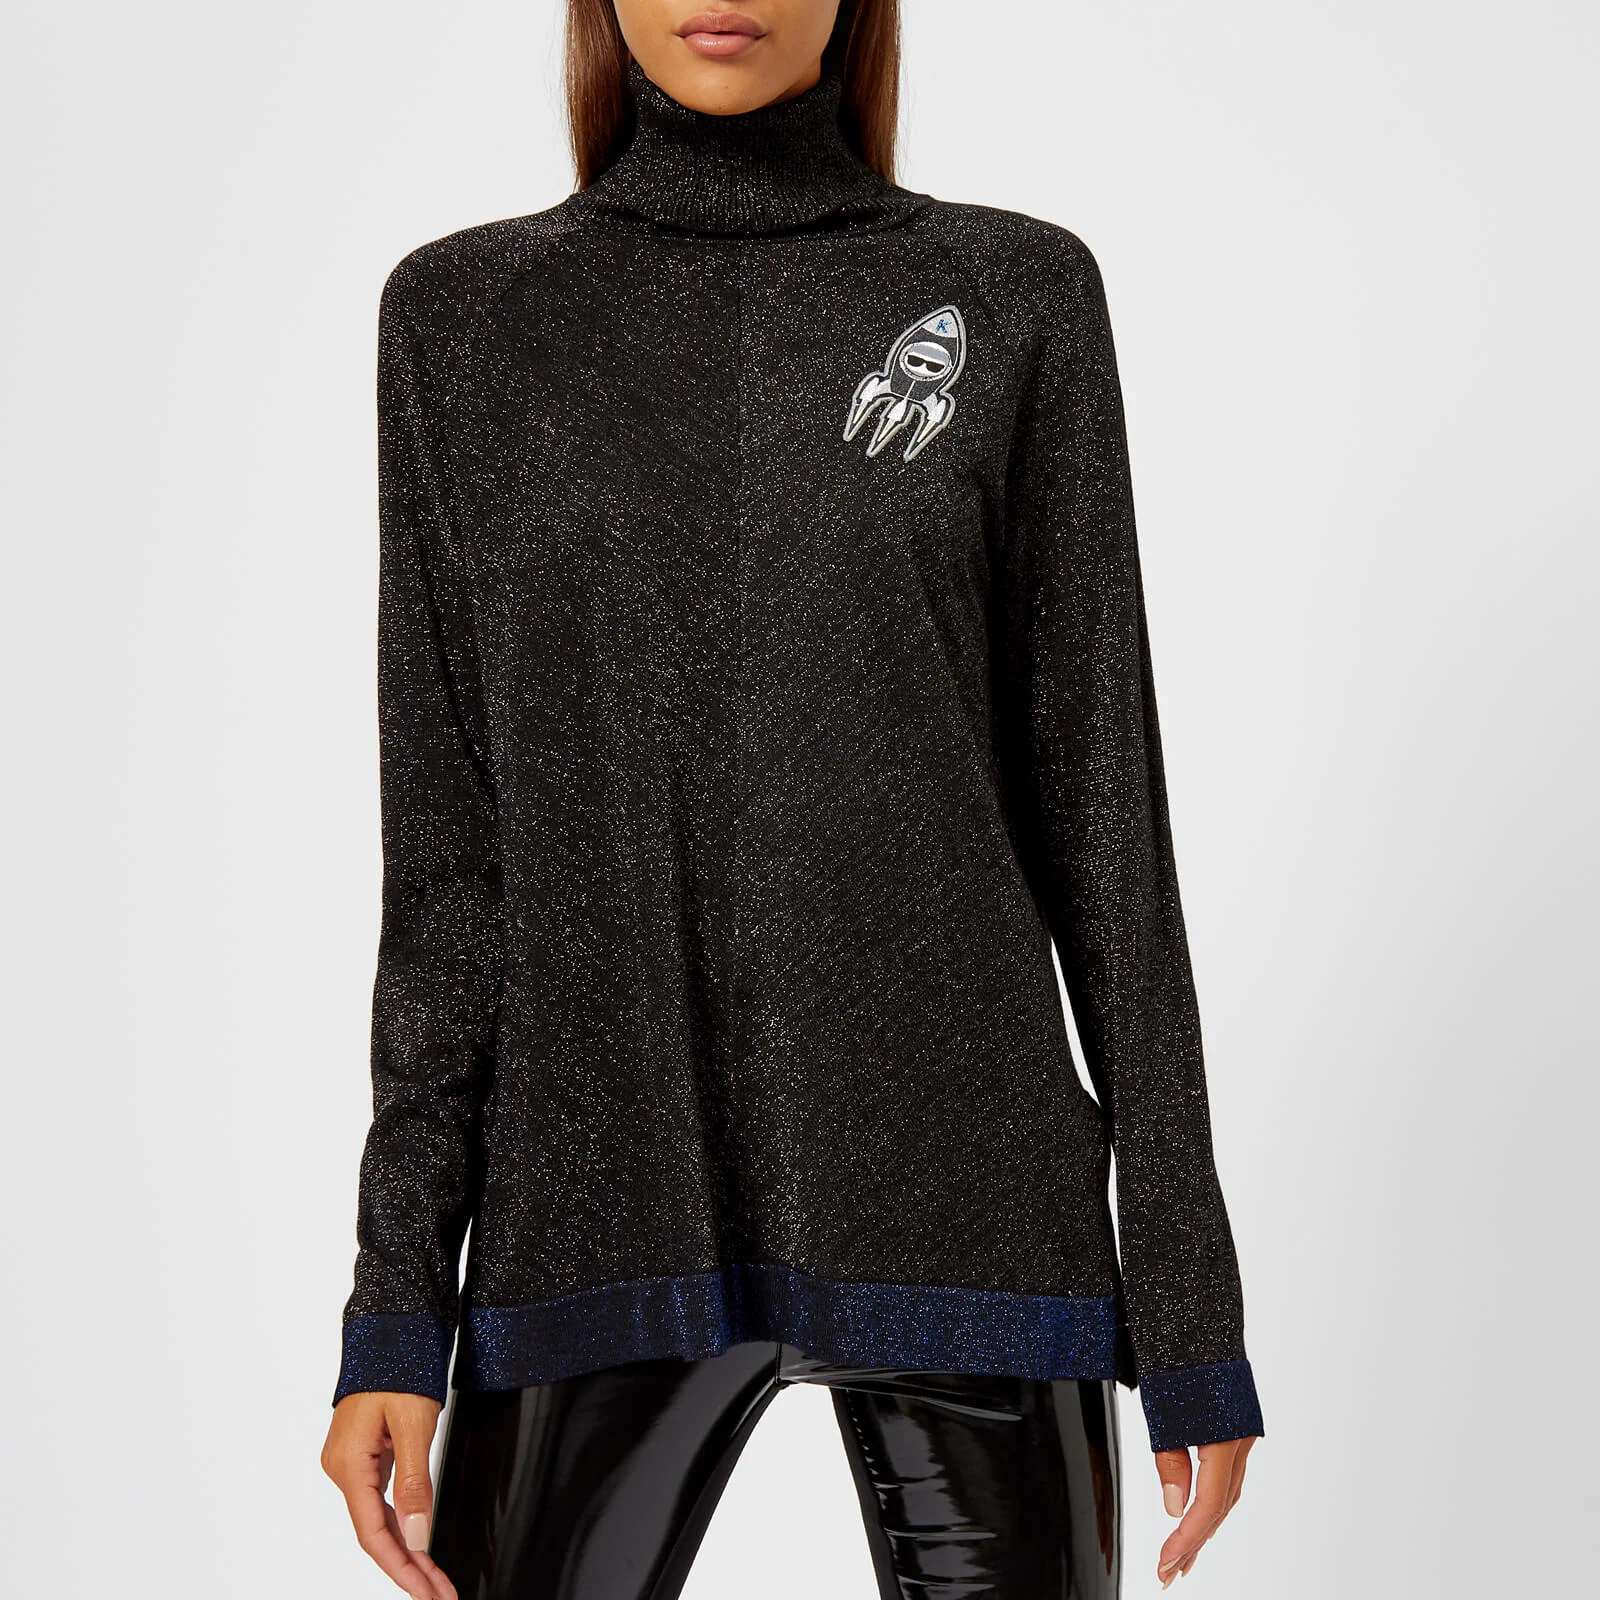 Karl Lagerfeld Women's Space Karl Lurex Knitted Jumper with Patches - Black Image 1